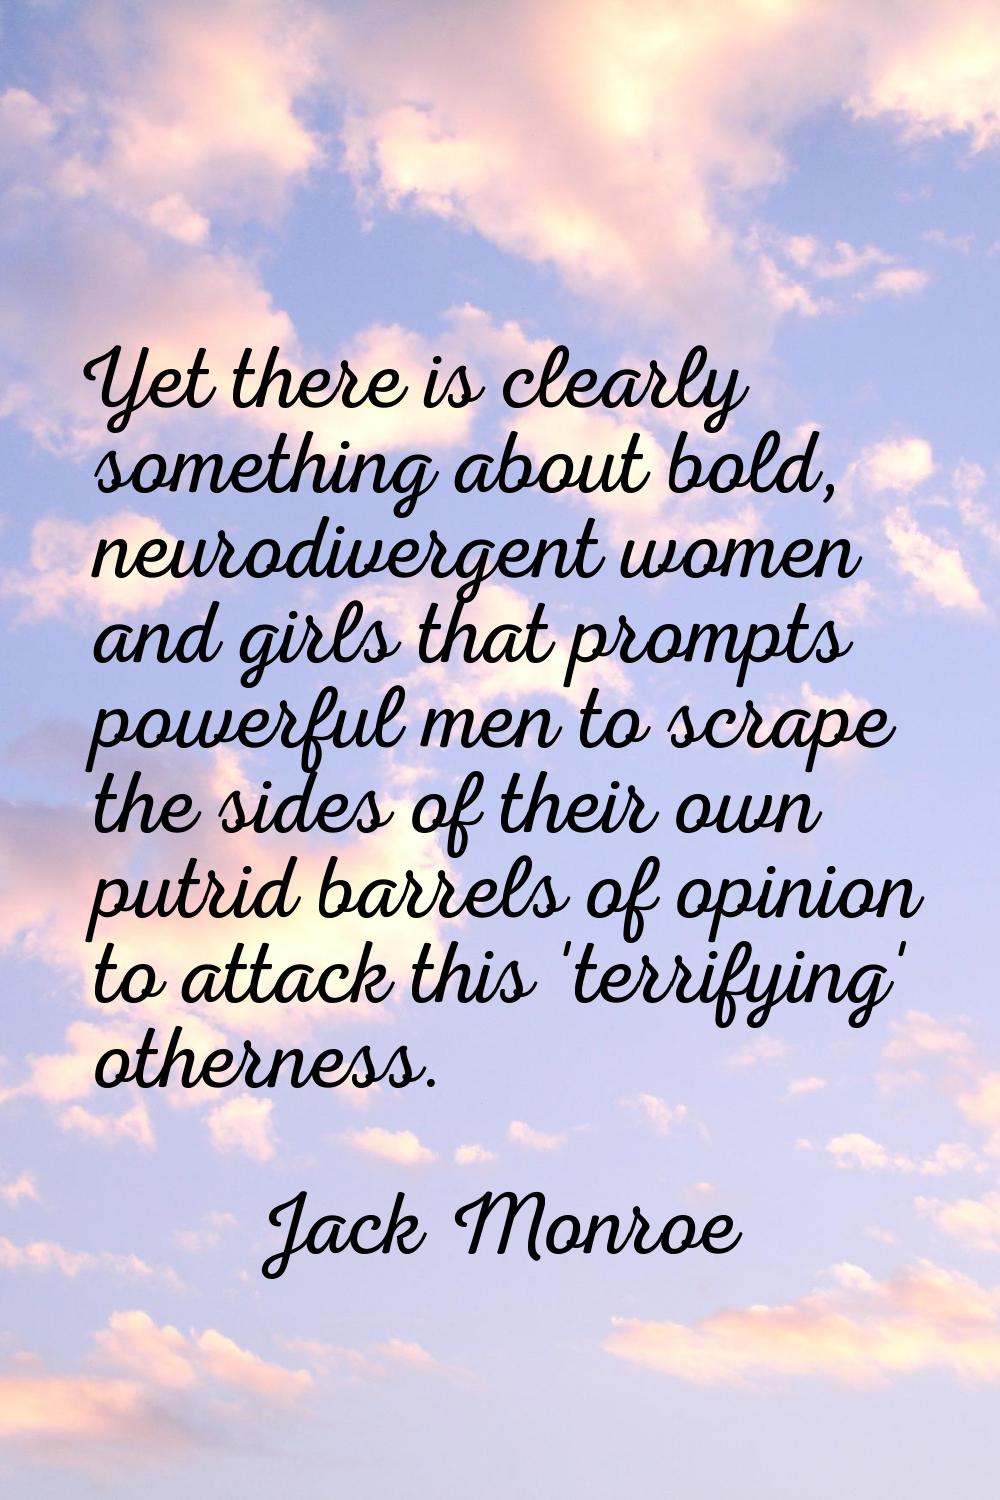 Yet there is clearly something about bold, neurodivergent women and girls that prompts powerful men